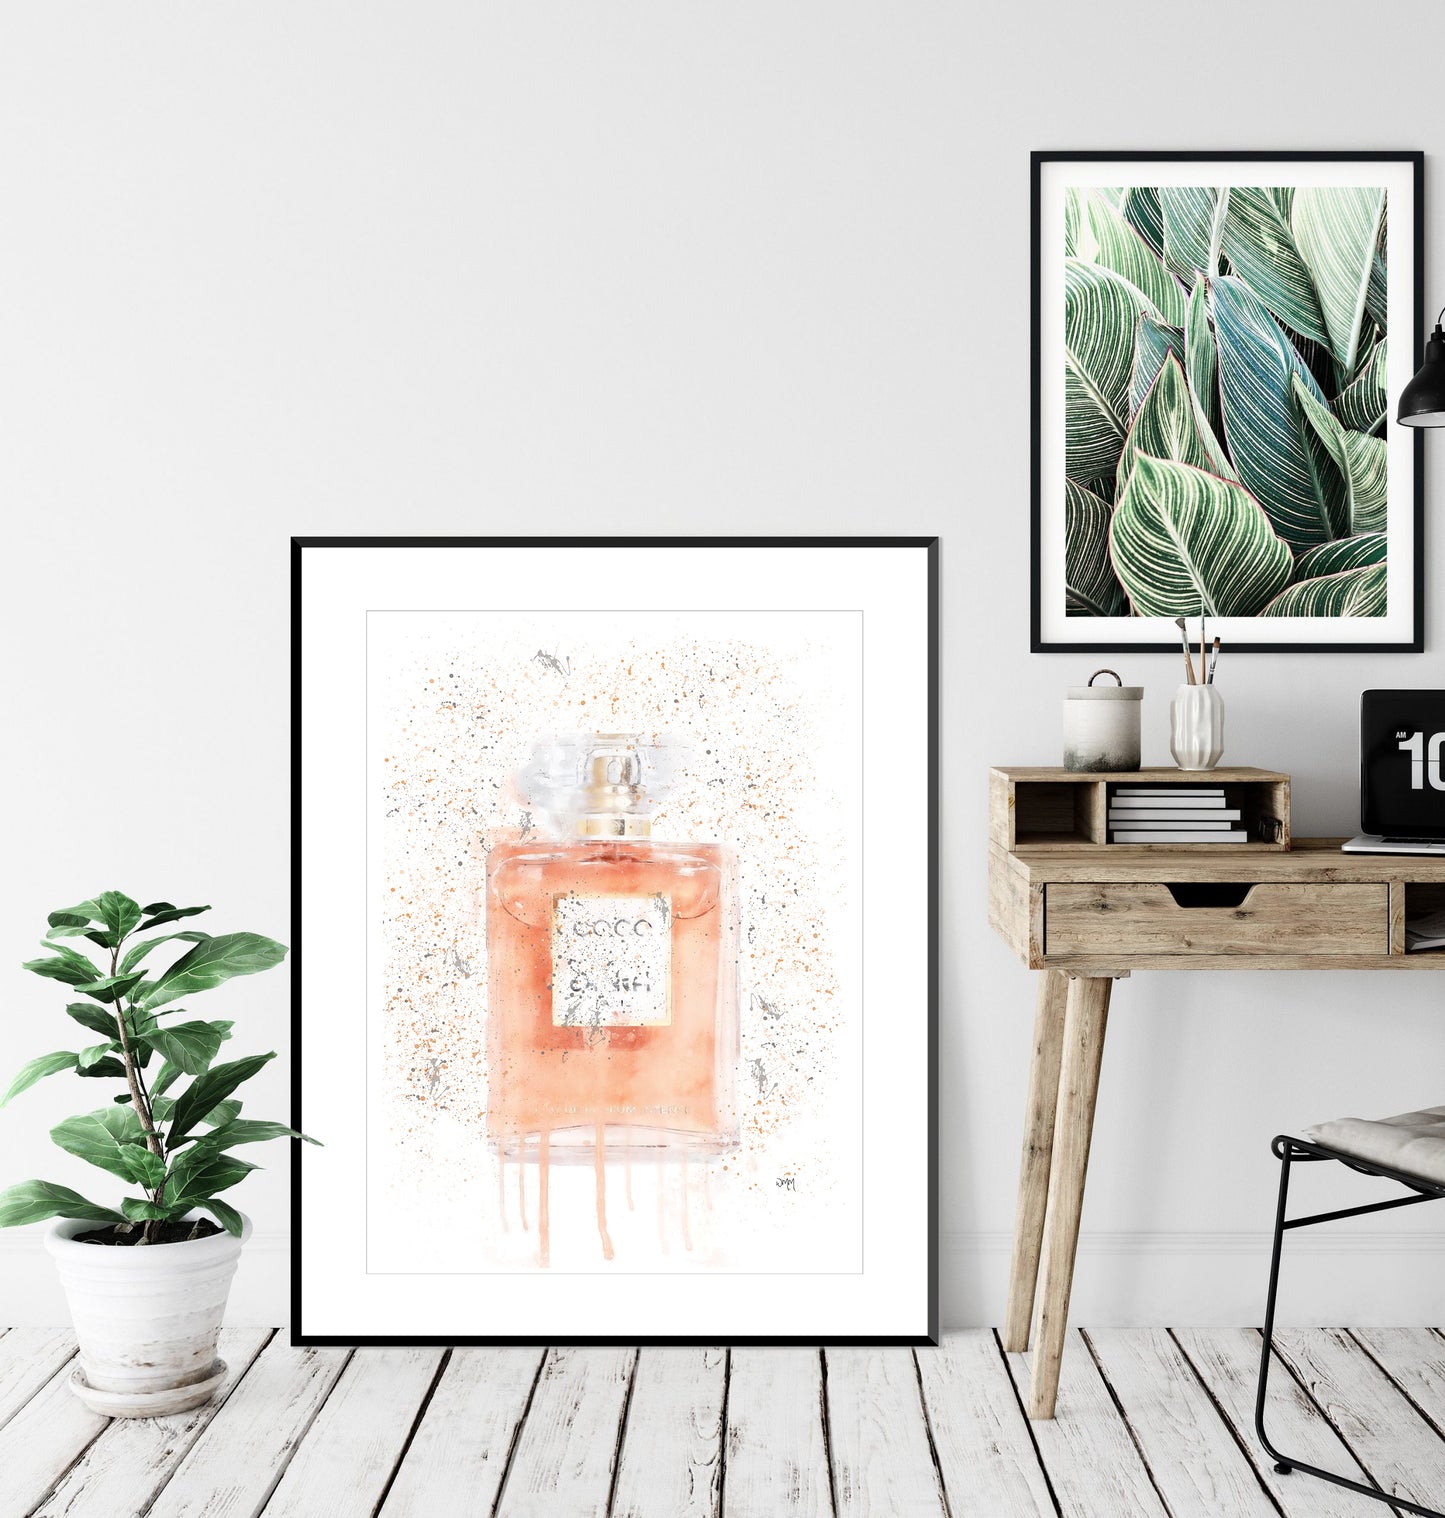 Coral Perfume Bottle Wall Art Print - available in different sizes